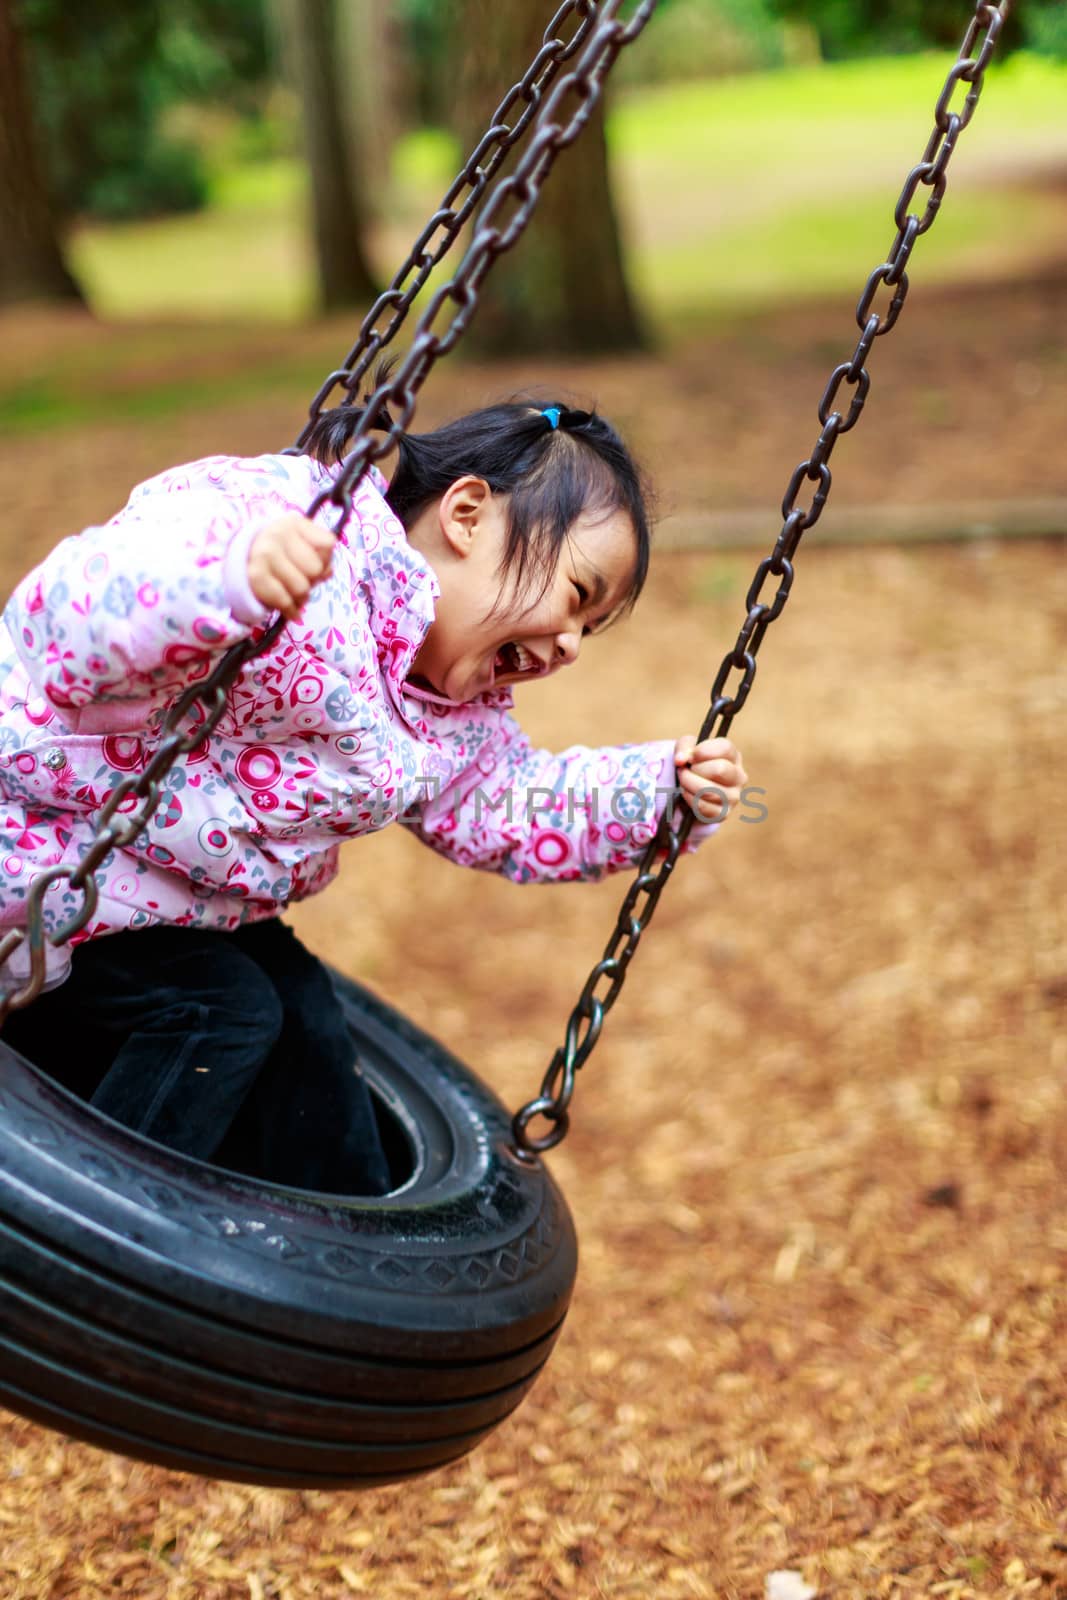 A little girl having a great time on a swing in a playground.